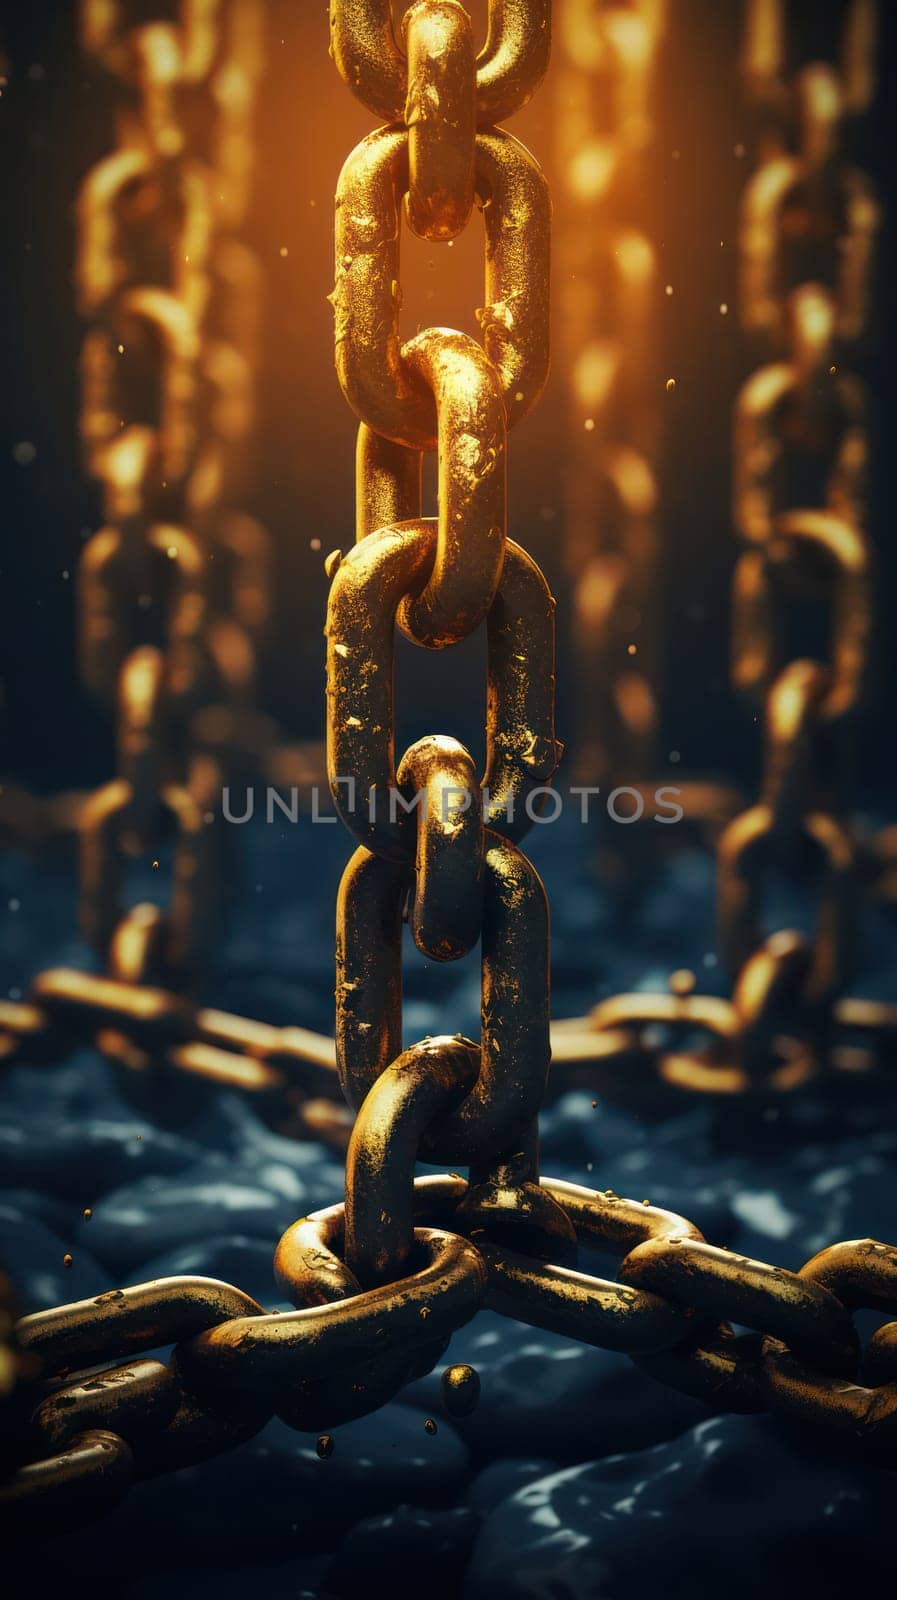 Strength and Security: Rusty Chains Connect, Symbolizing Protective Power by Vichizh